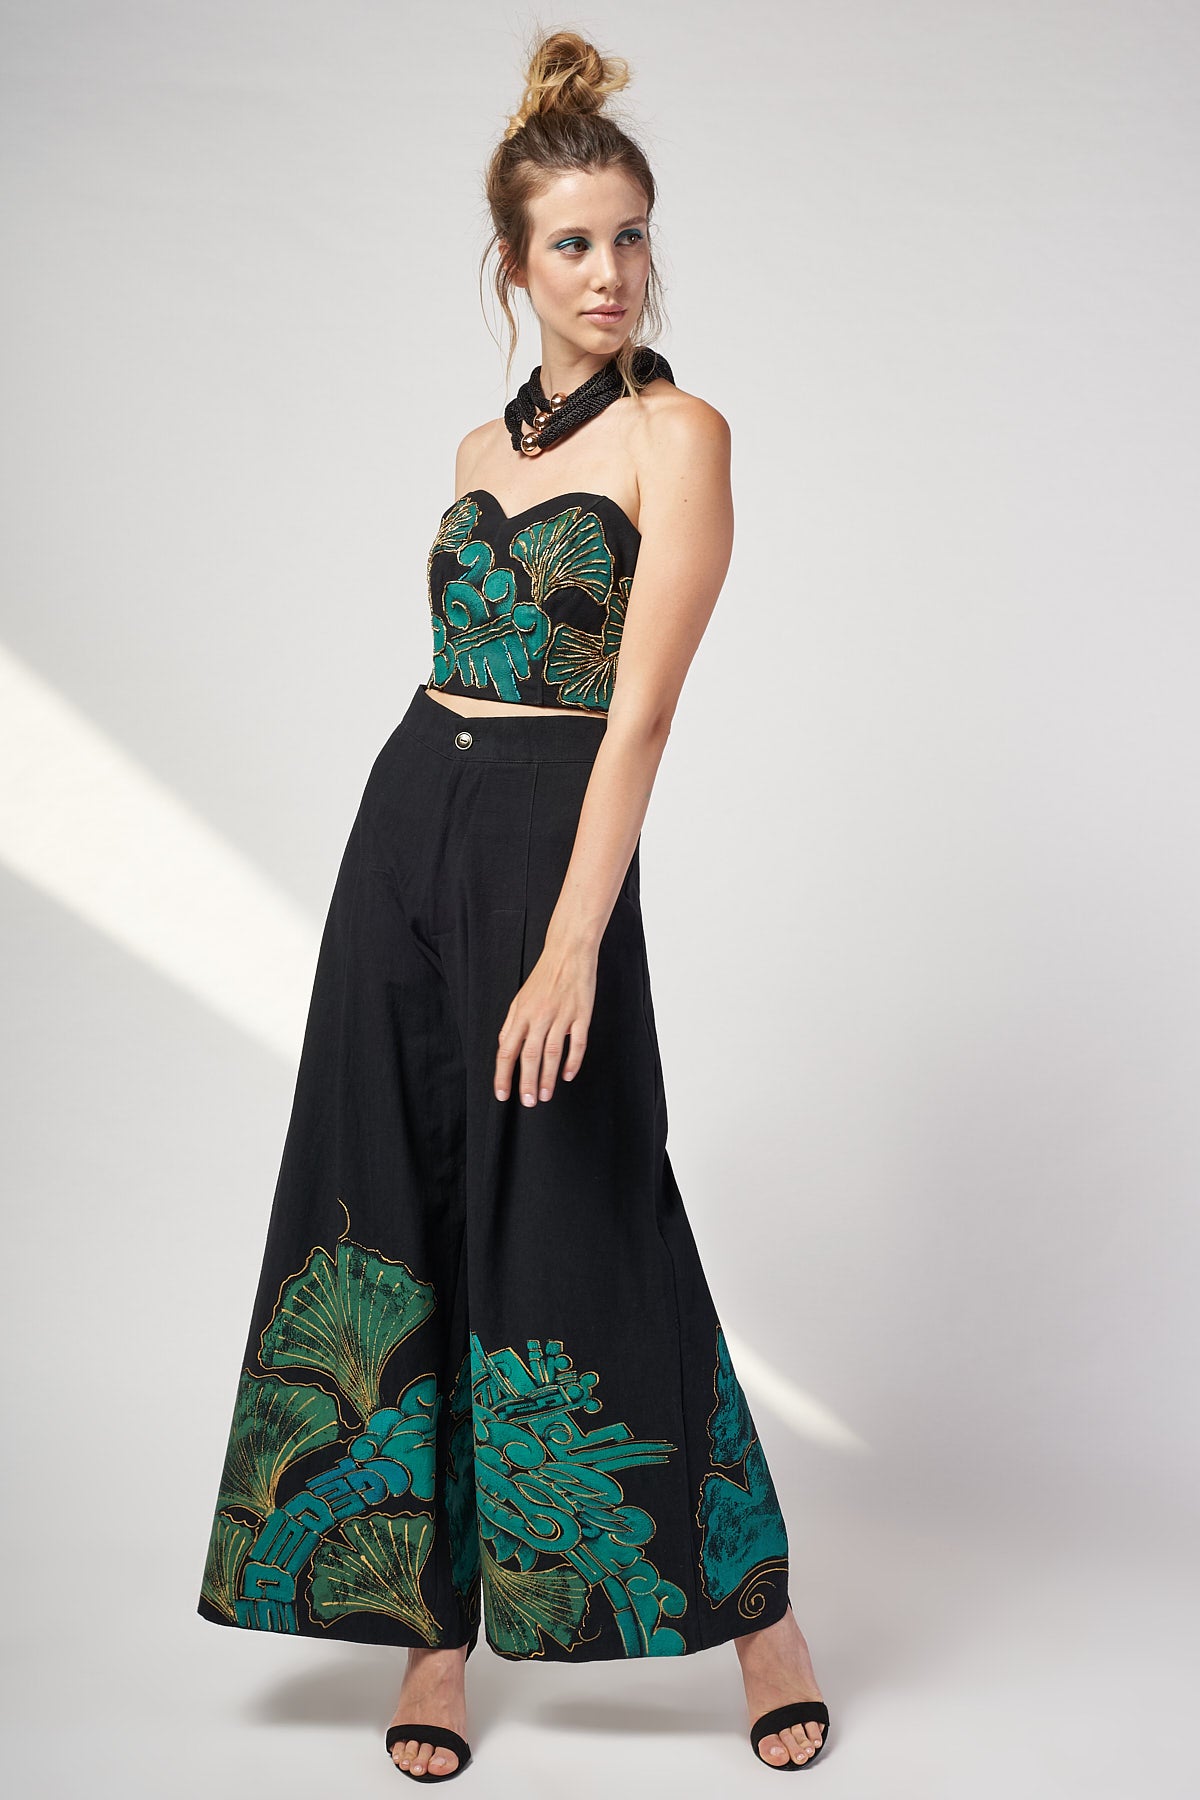 HAND PAINTED PALAZZO TROUSERS - JAGUAR DYNASTY